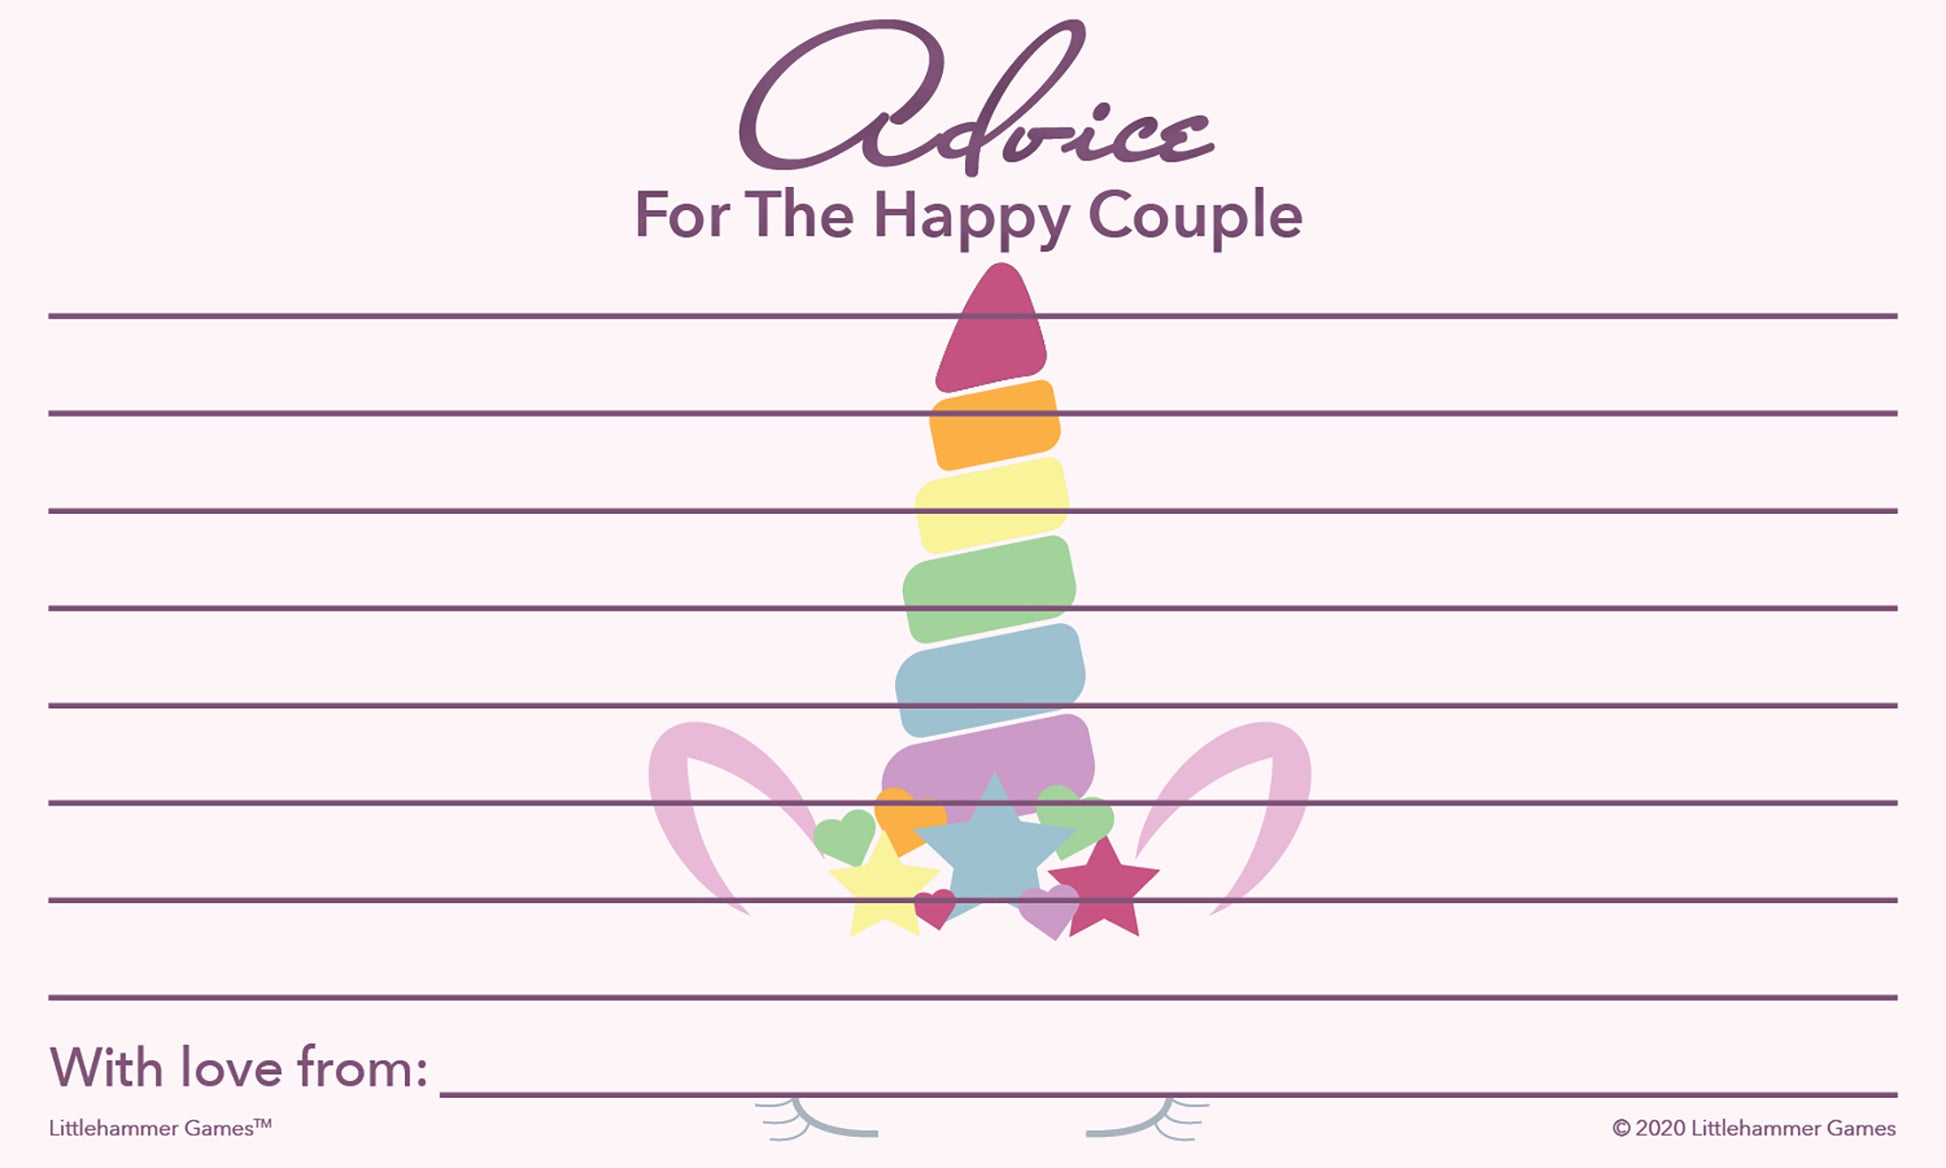 Unicorn-themed Advice for the Happy Couple cards